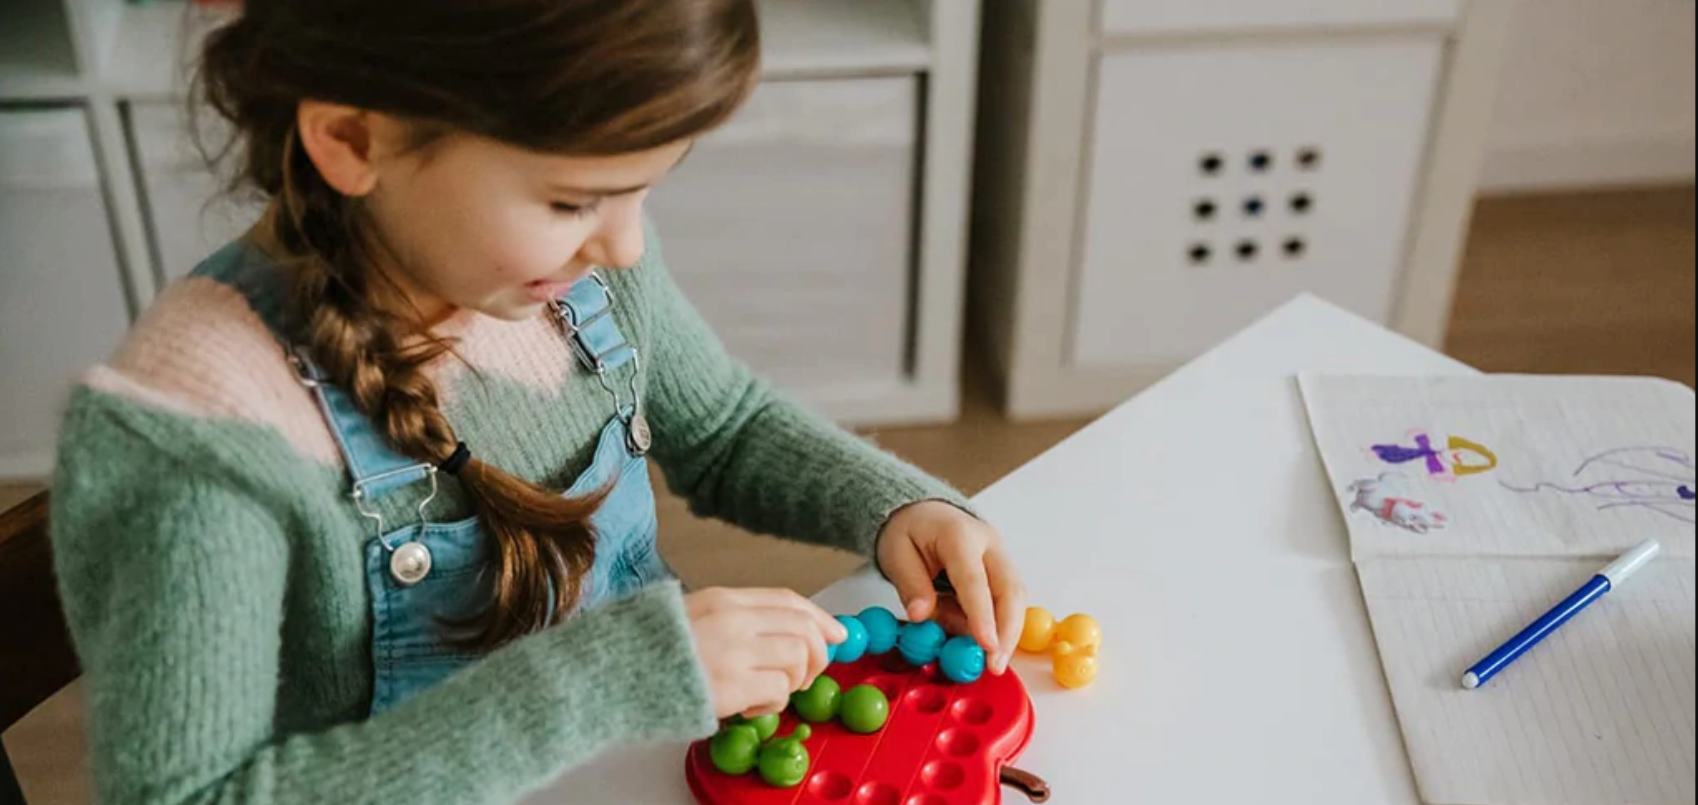 The best STEM toys for kids in 2022